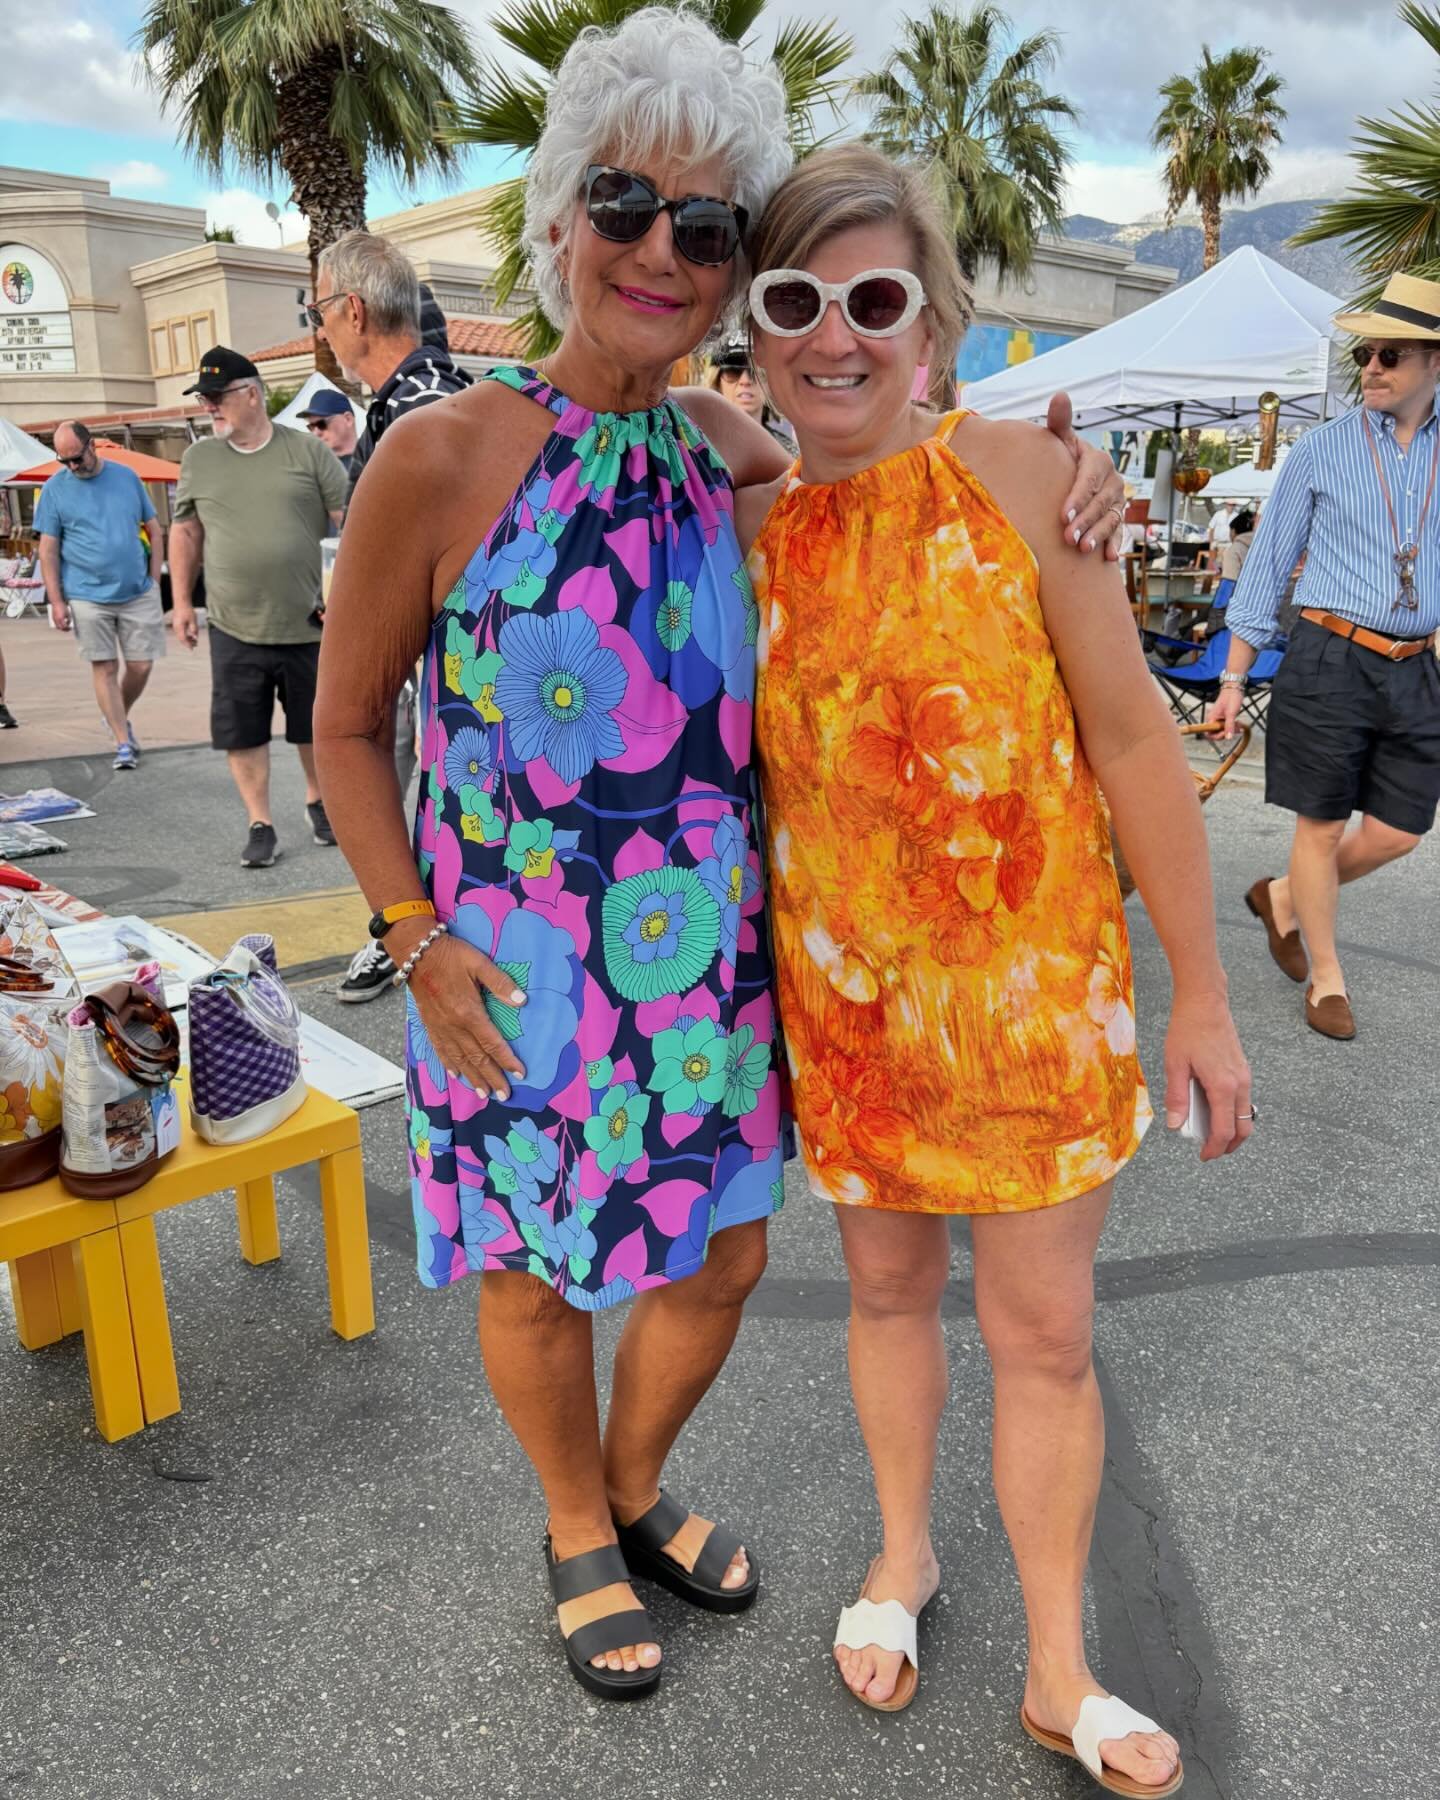 Wheee! What a great day at the @psvintagemarket!
Thanks to everyone who came out to say hi and supported Chelle Summer! @aimerdoll rocked her Chelle Summer La Palma dress (mine is made with vintage fabric) and @kar_kar_bakescakes had to choose betwee